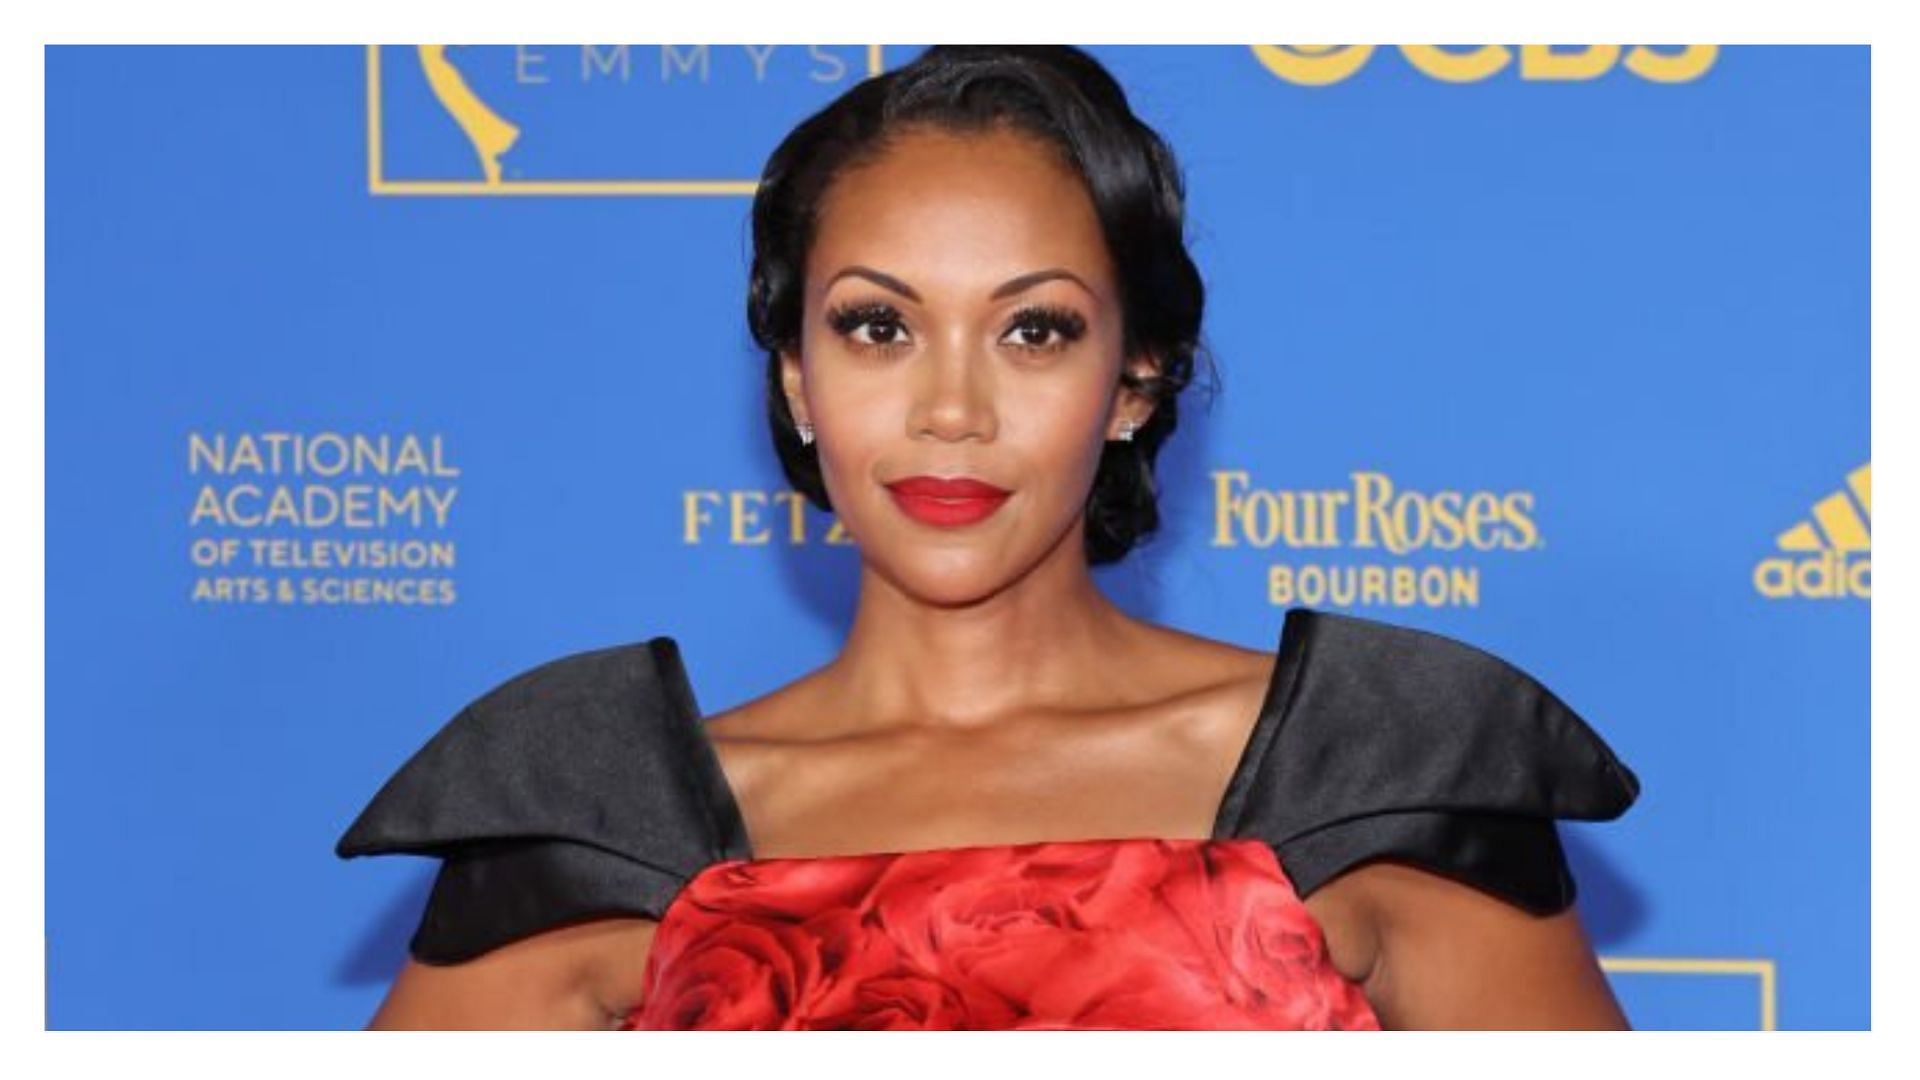 Mishael Morgan won a Daytime Emmy Award for her performance in The Young and the Restless (Image via Amy Sussman/Getty Images)